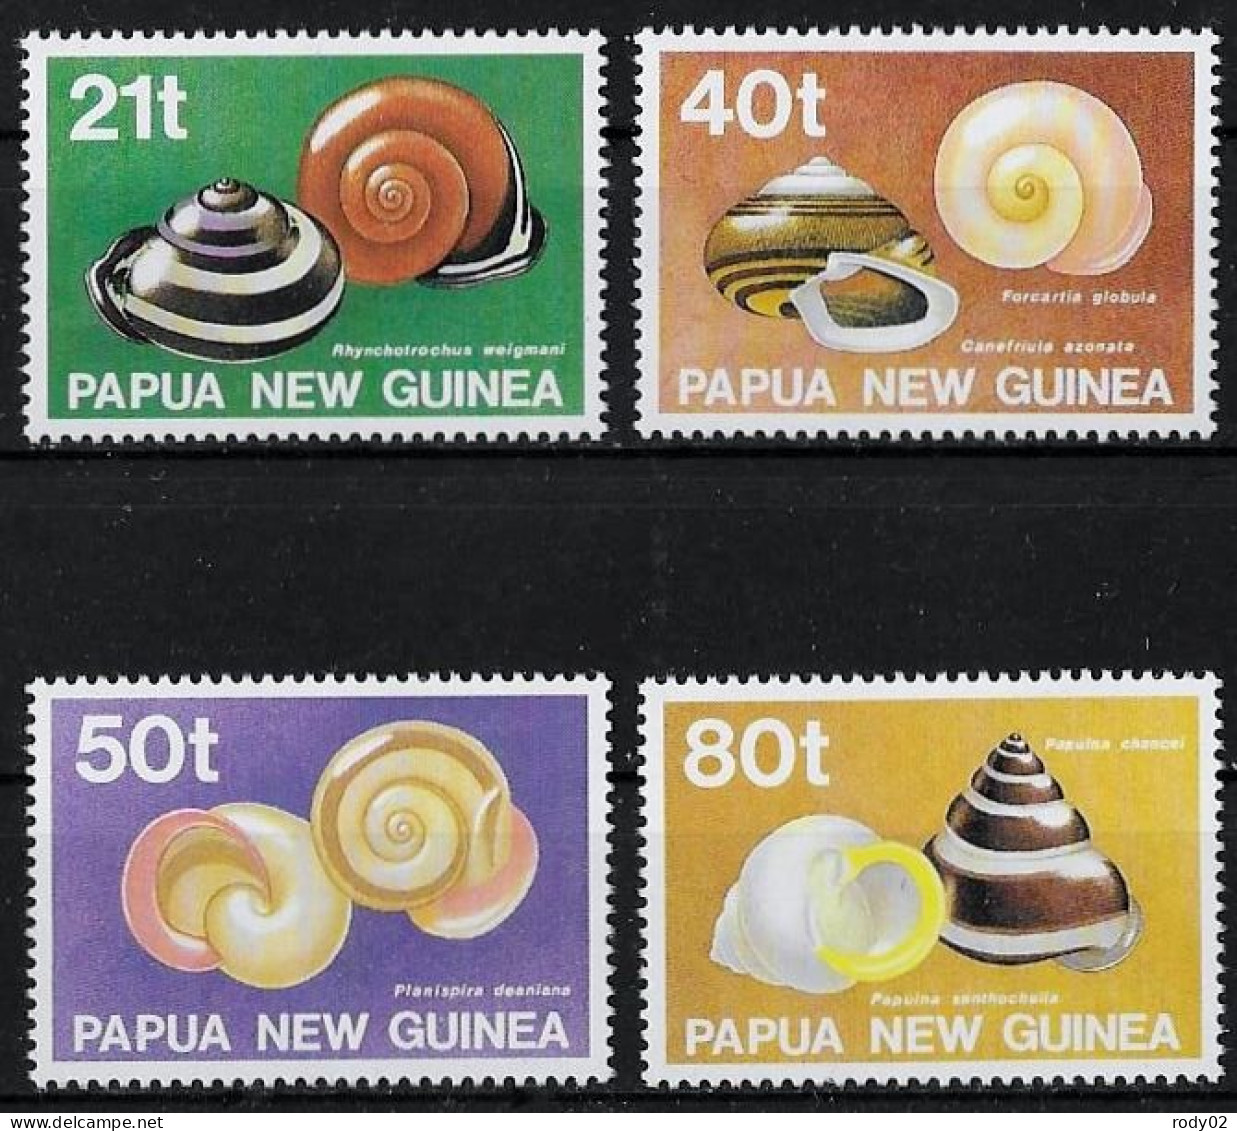 PAPOUASIE NOUVELLE-GUINEE - COQUILLAGES - N° 626 A 629 - NEUF** MNH - Coneshells